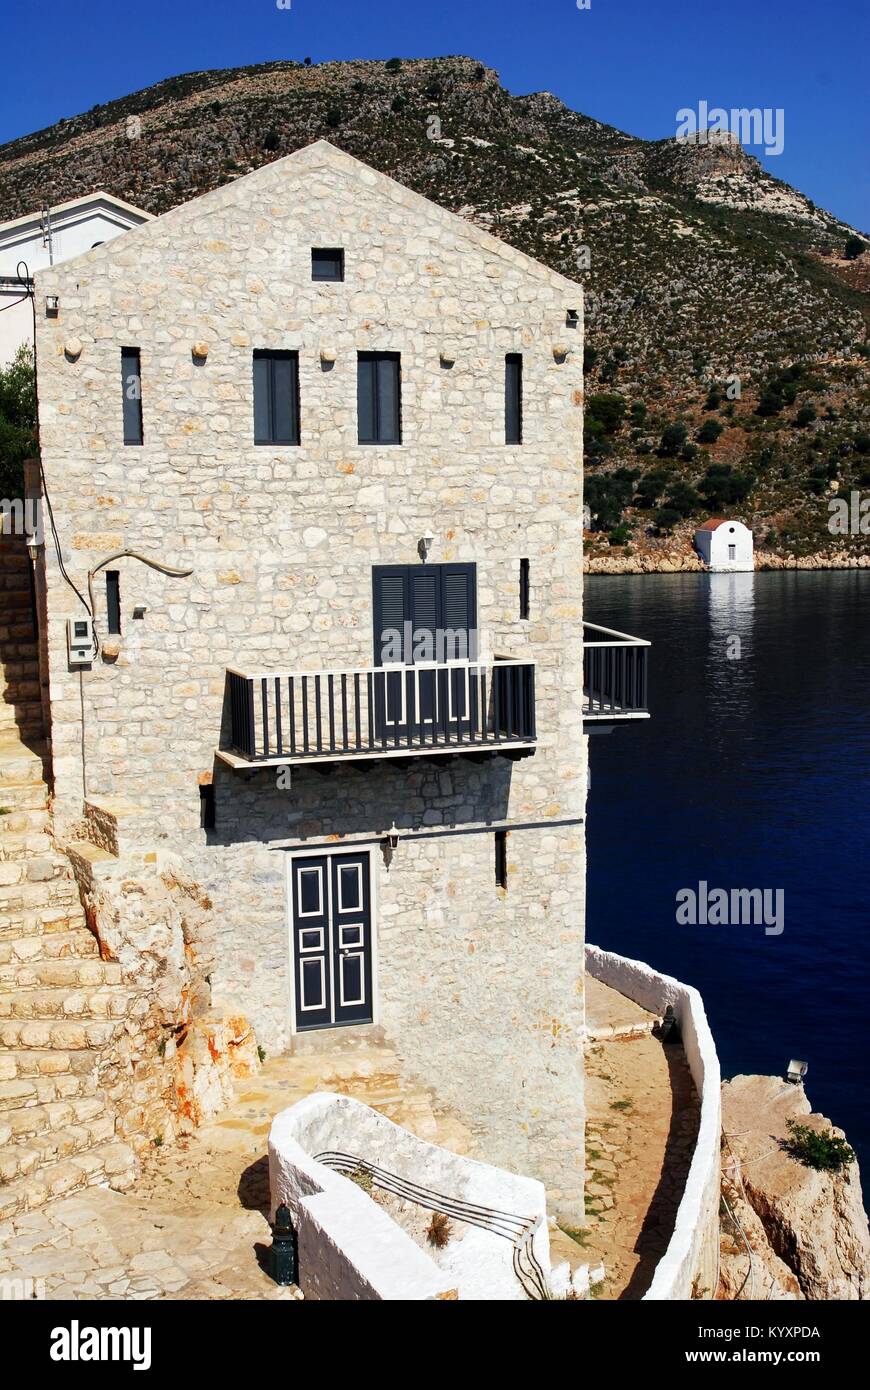 Traditional house by the harbour of the town of Kastellorizo, Kastellorizo island, Dodecanese islands, Greece Stock Photo